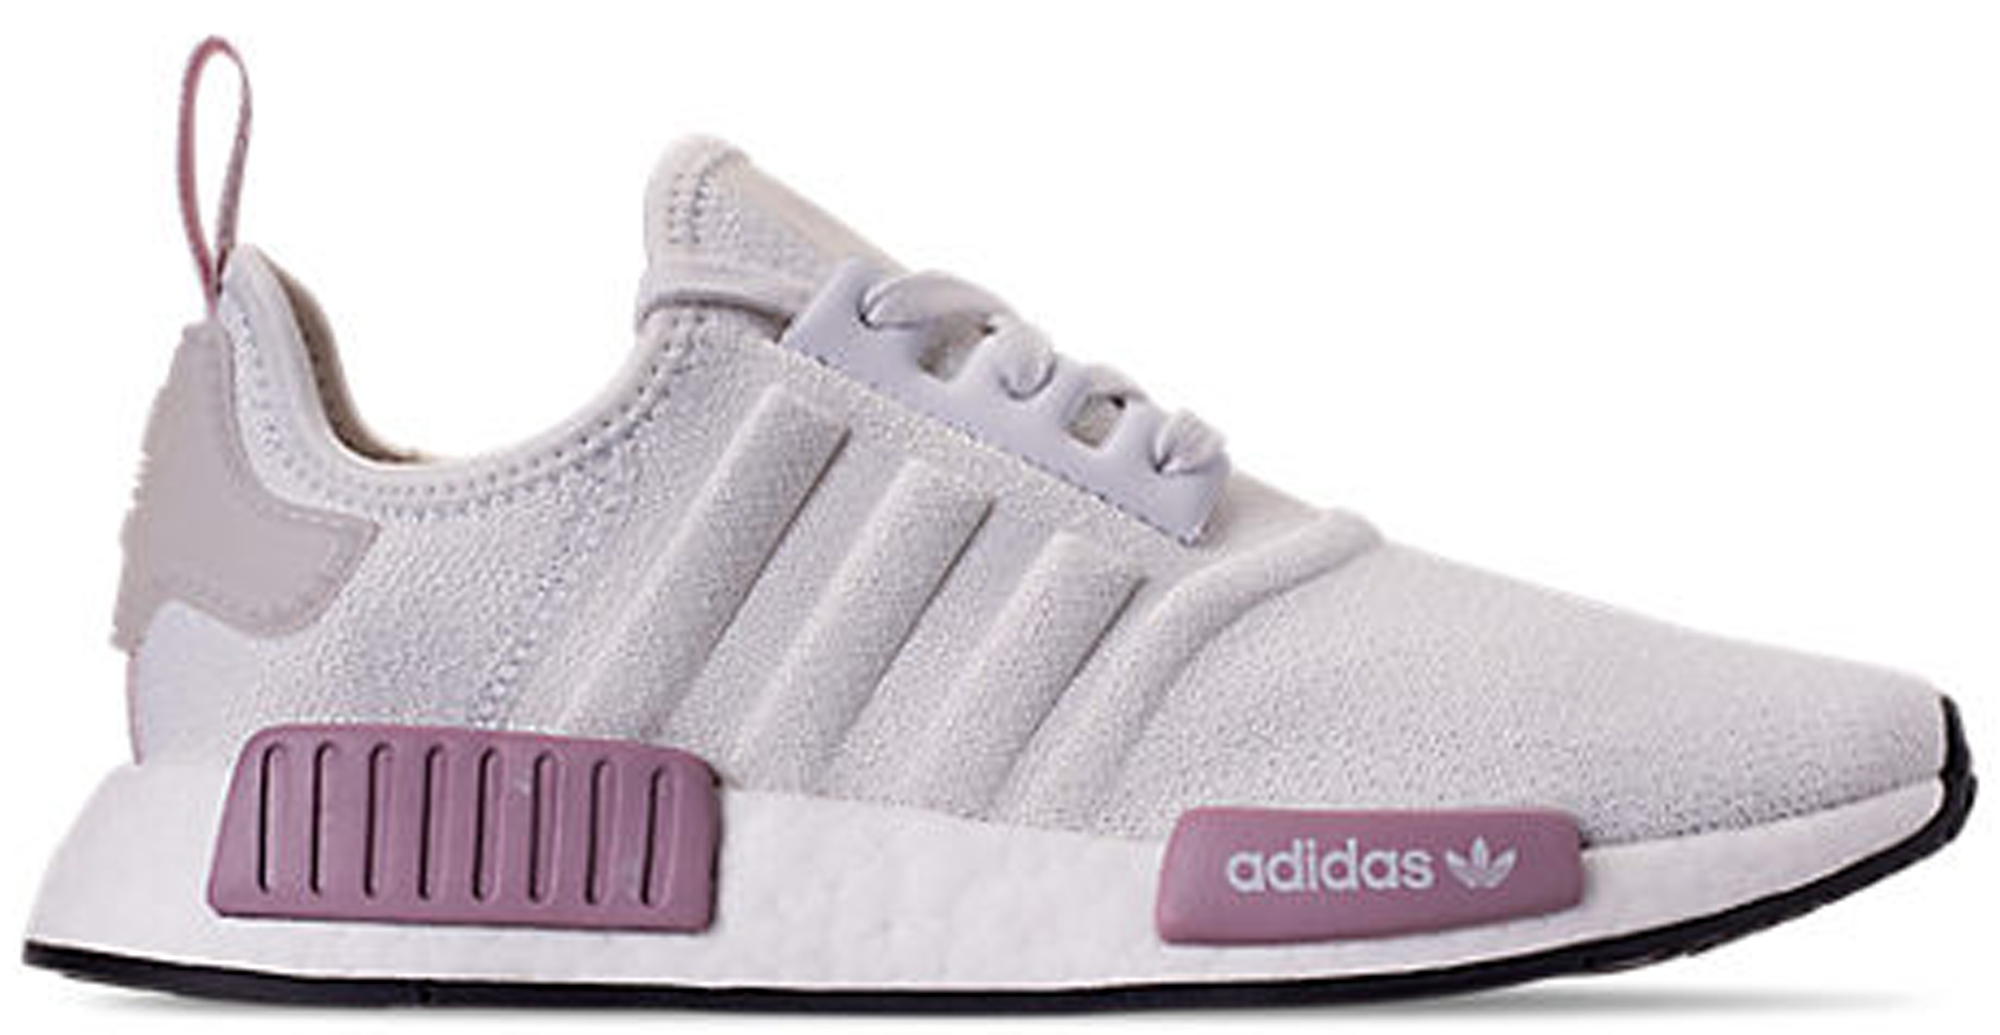 adidas NMD R1 Crystal White Orchid Tint 